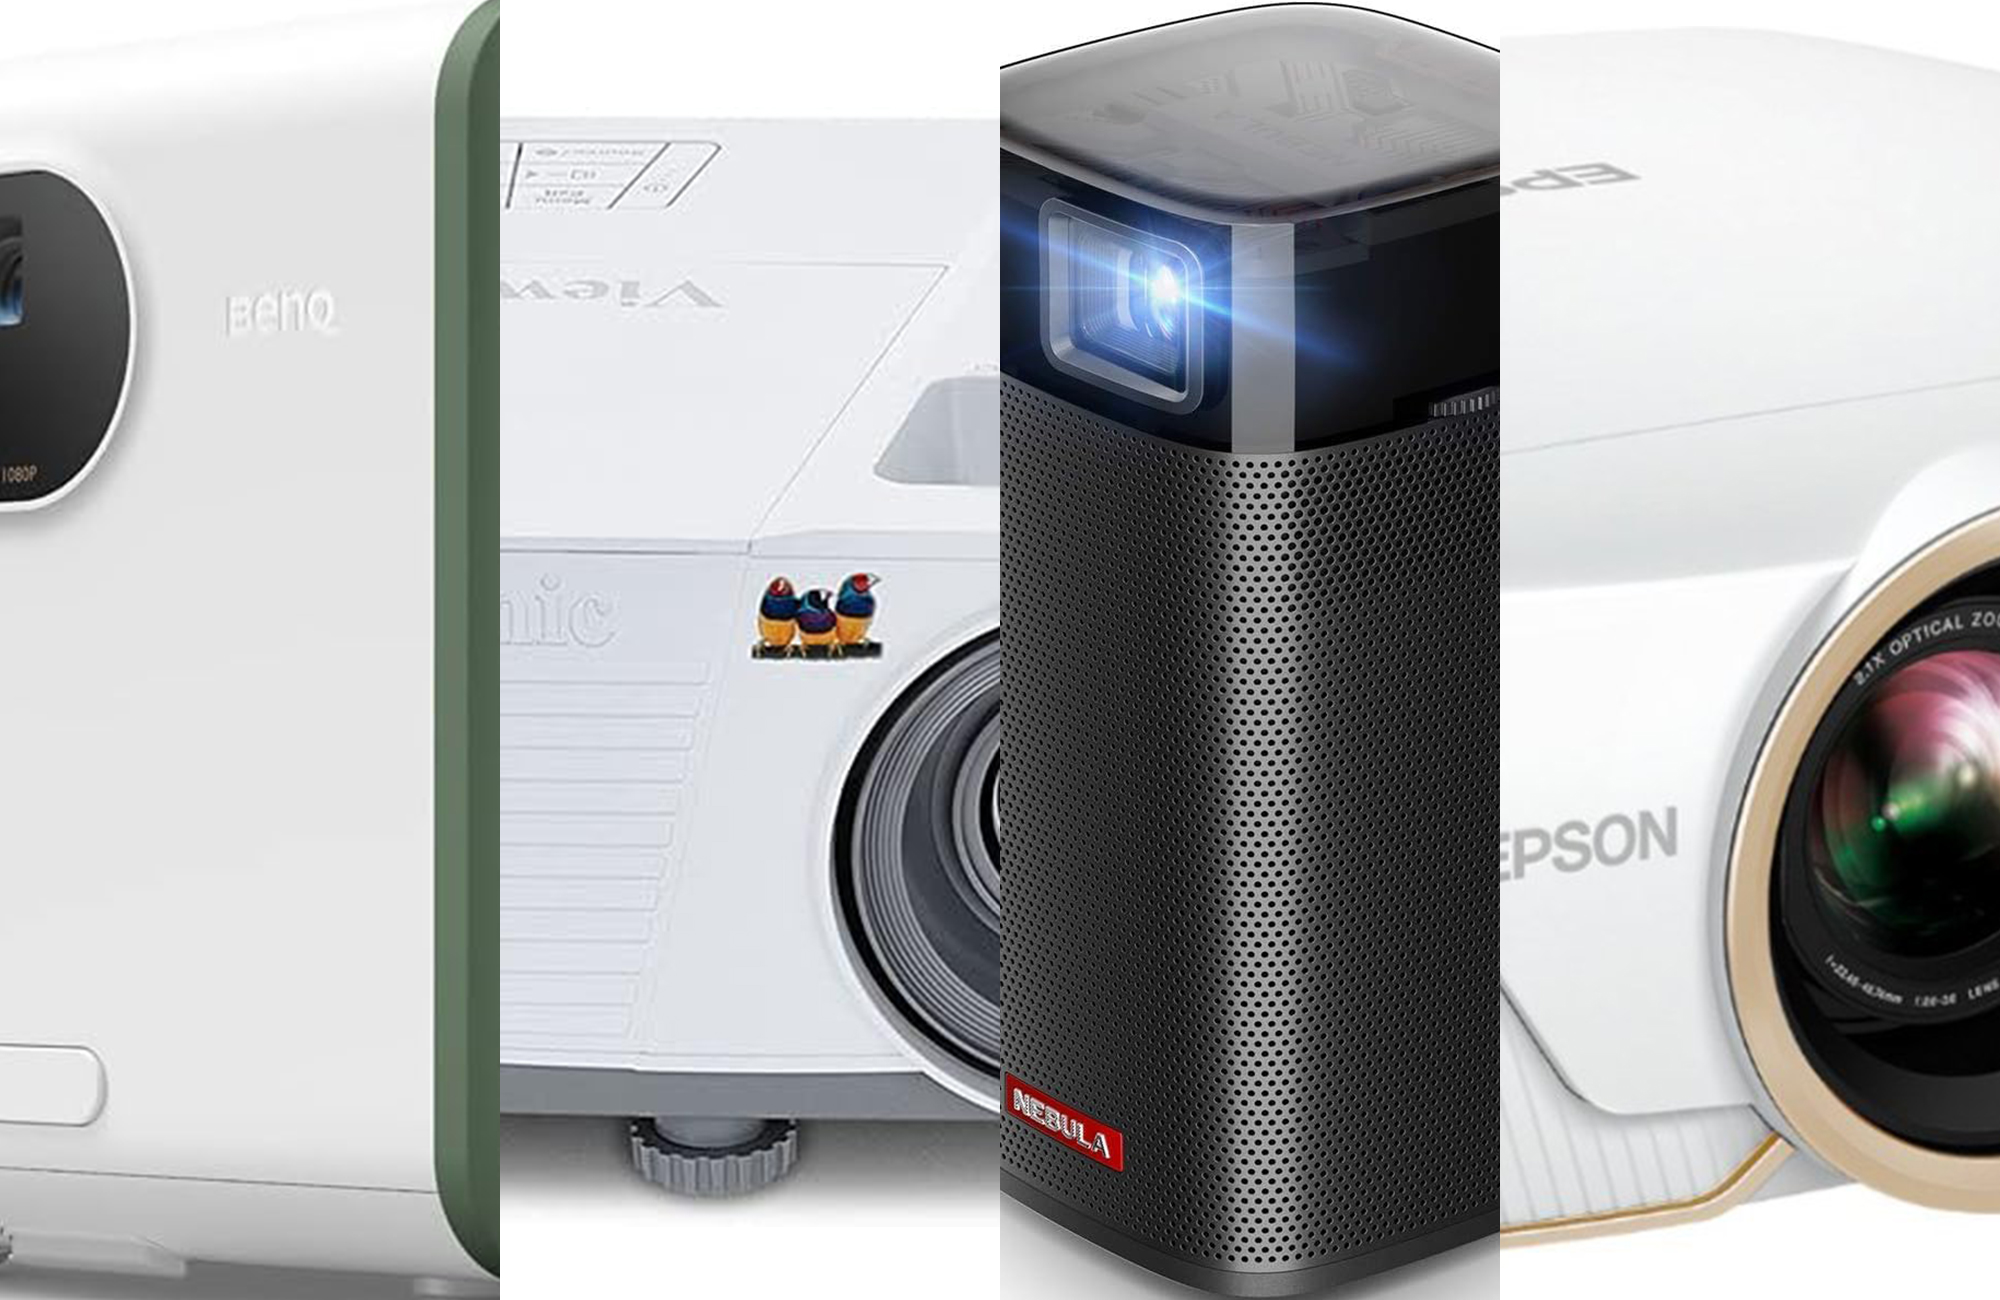 Beat the Sun: The Best Projector for Daytime Viewing in 2023 – PIQO - The  Smartest Portable Projector